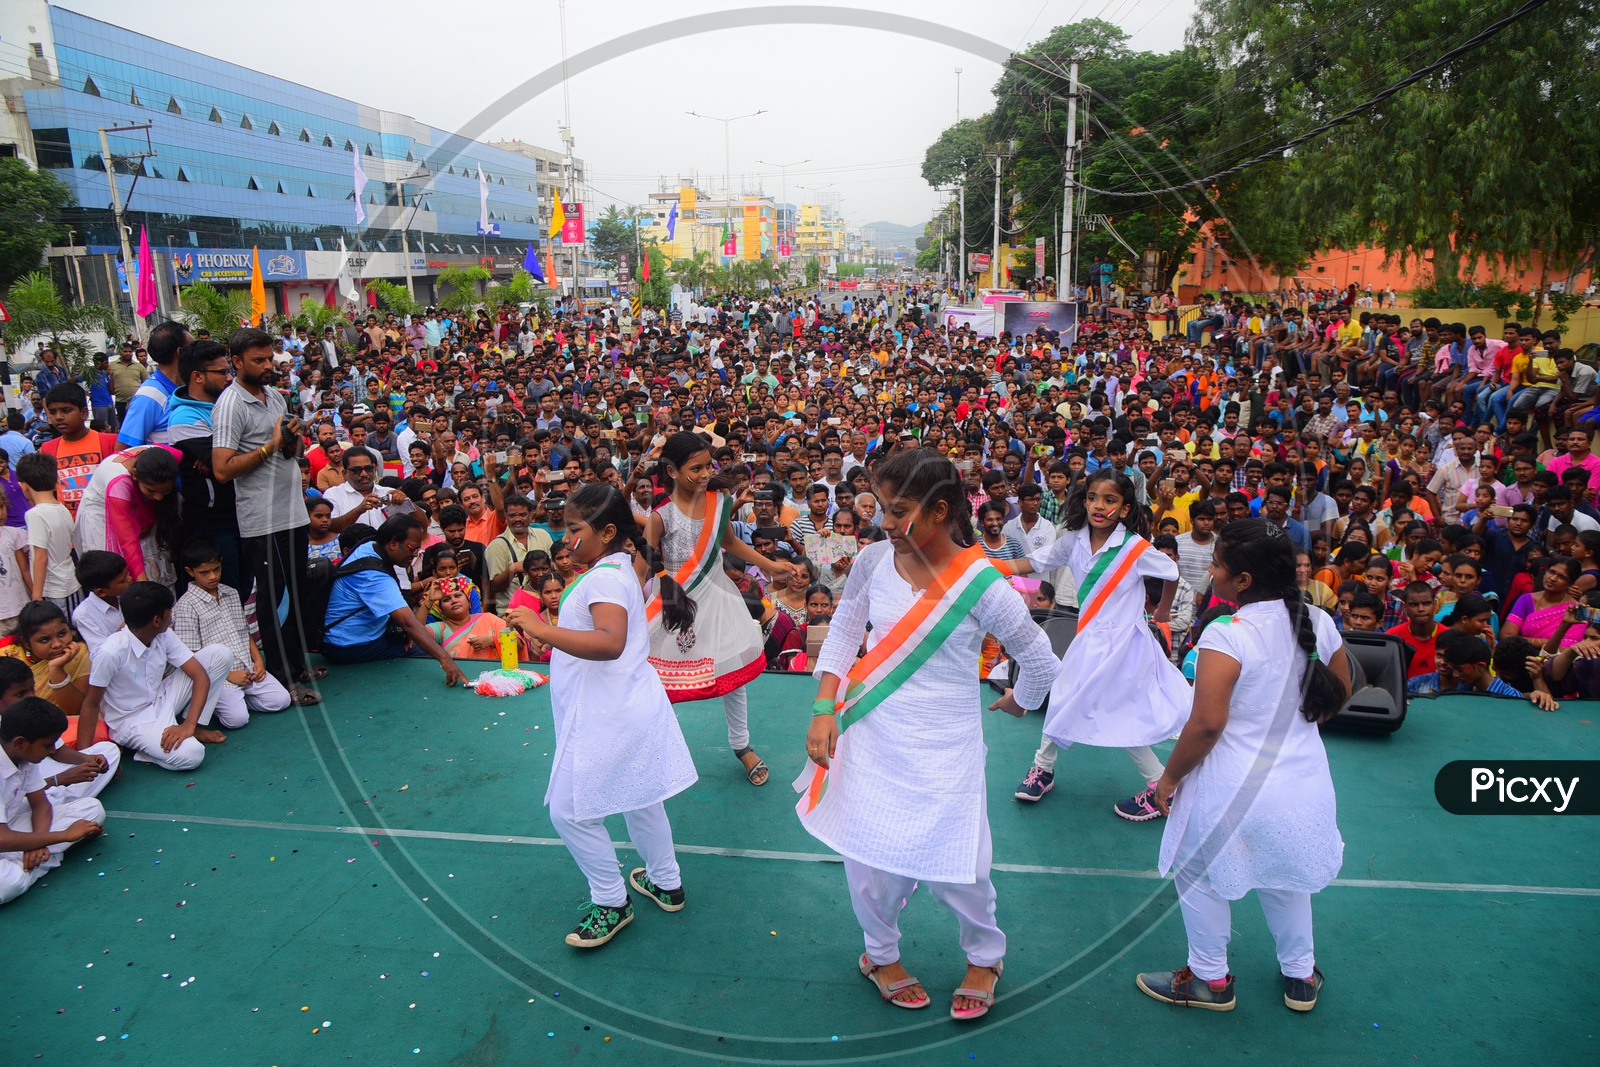 Students Dancing on Stage In a Event